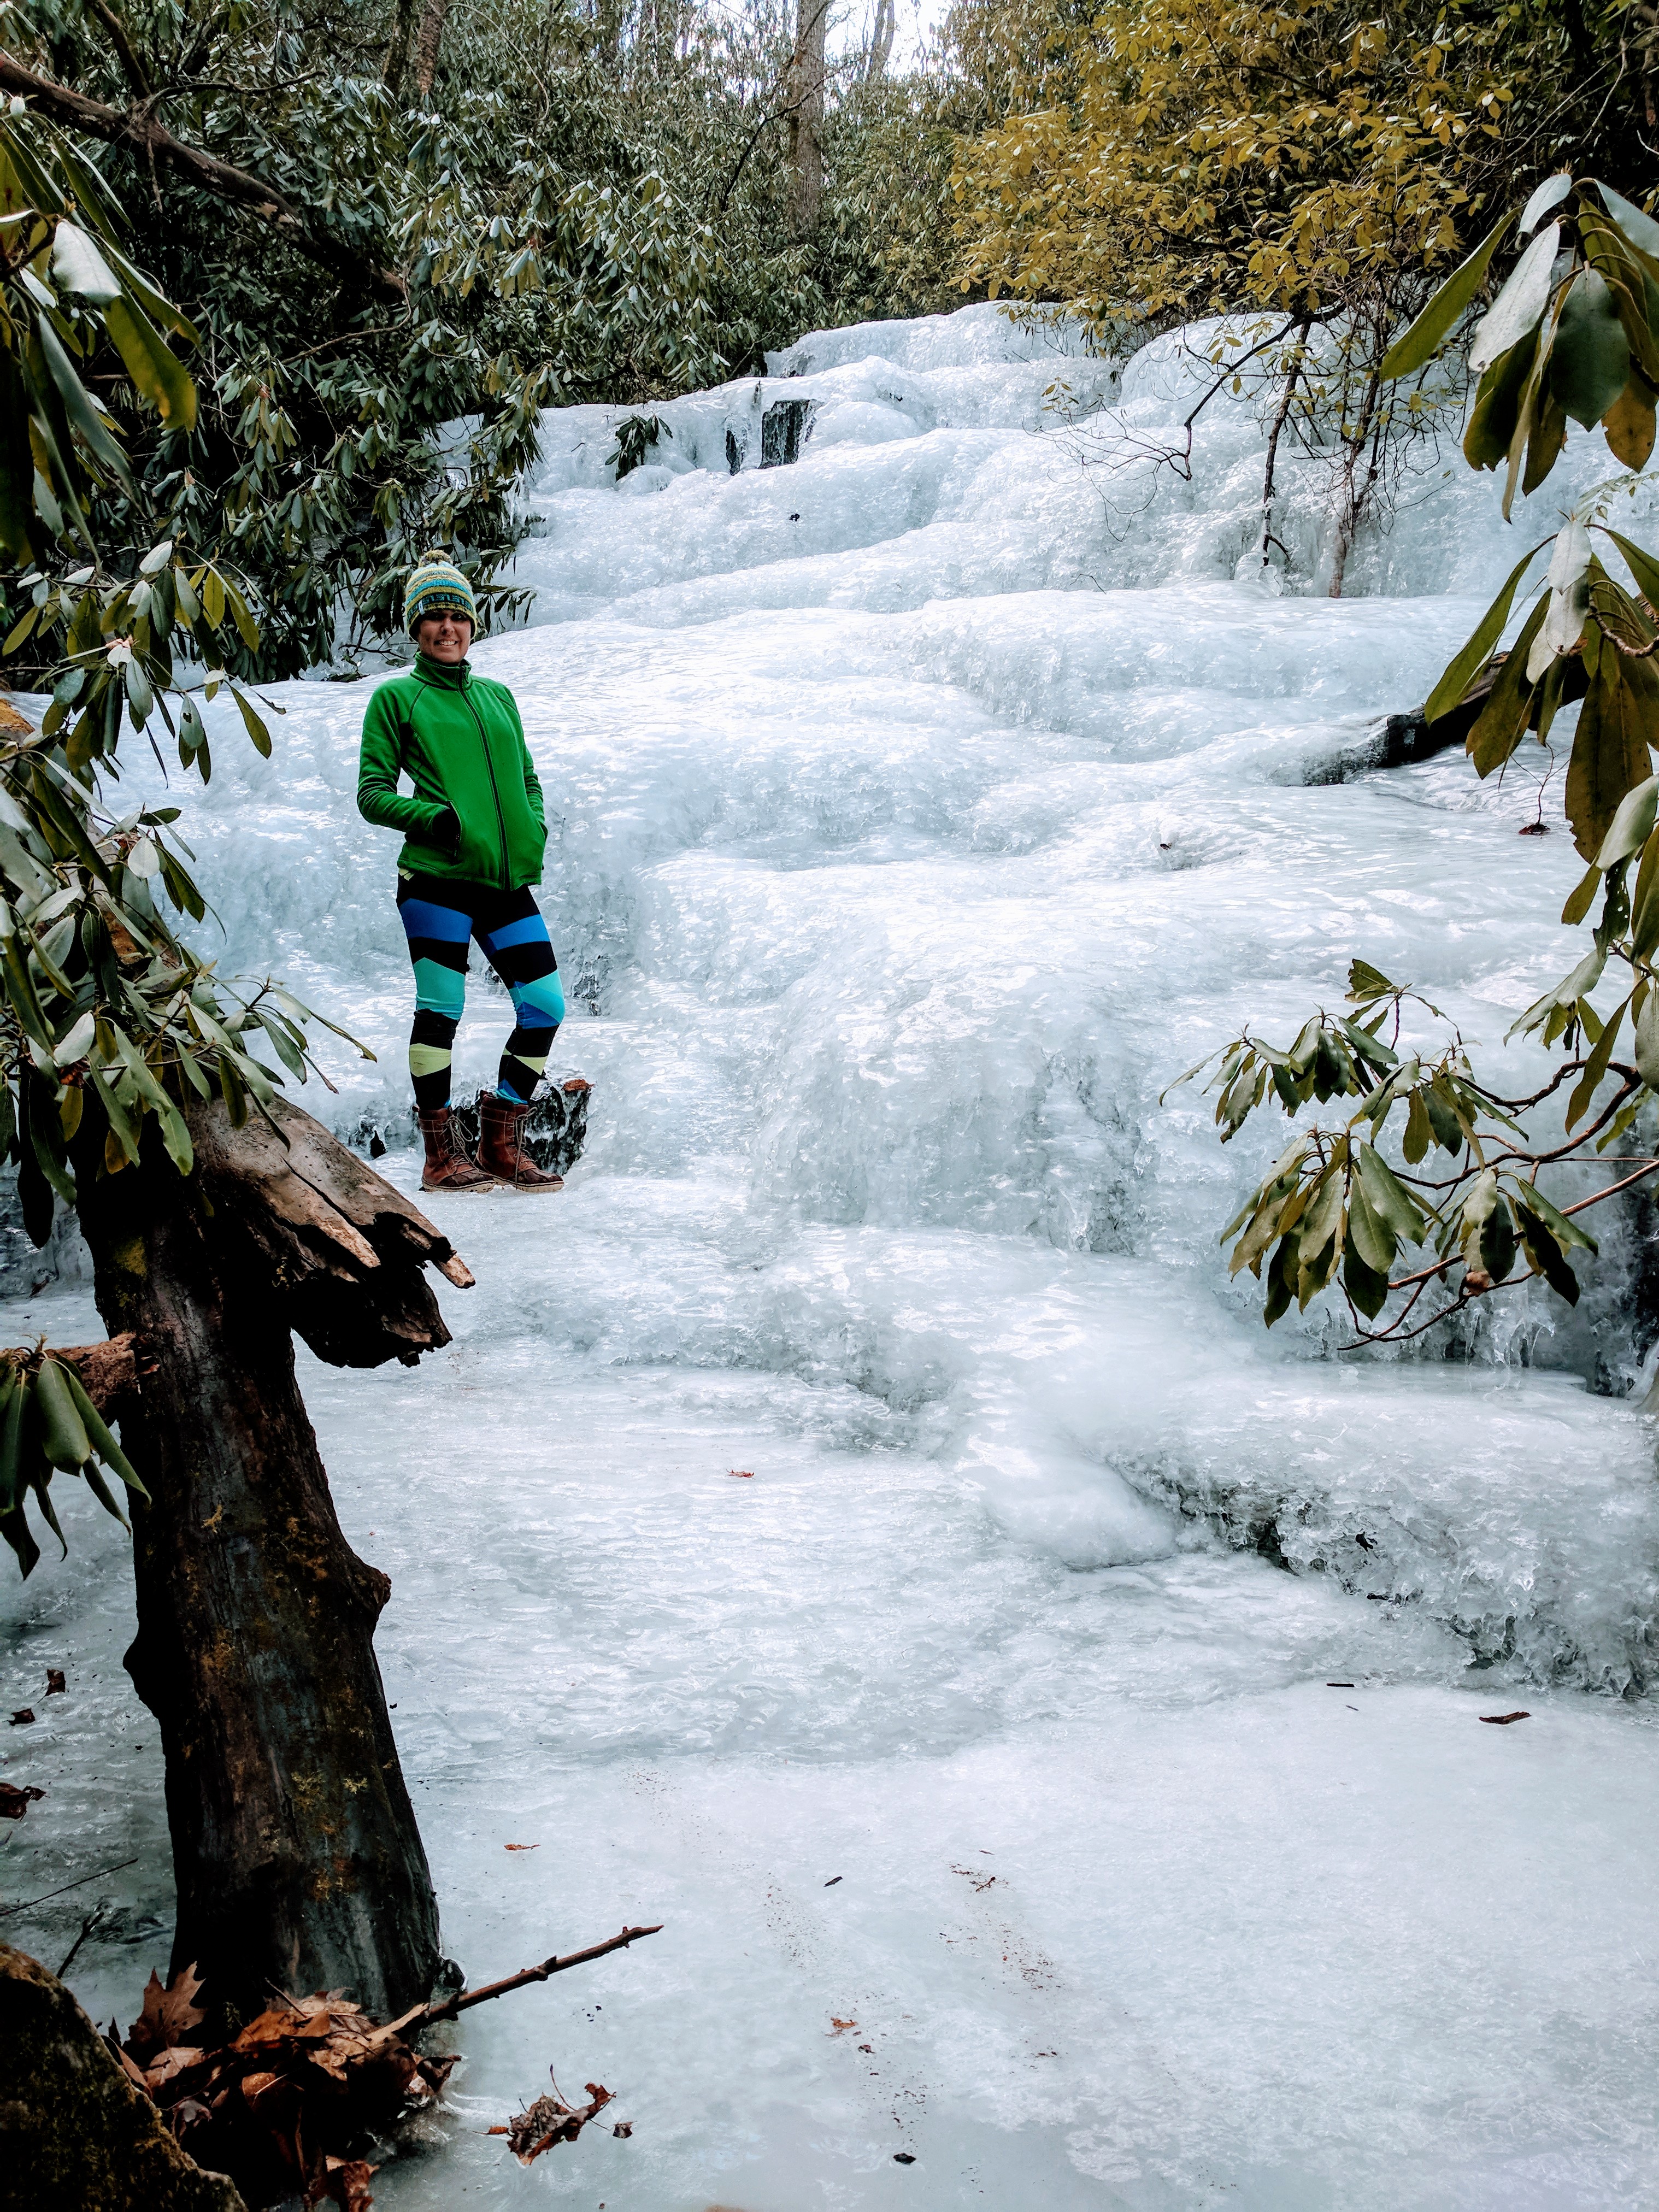 frozen meandering waterfall with woman in green jacket and hat standing on ice